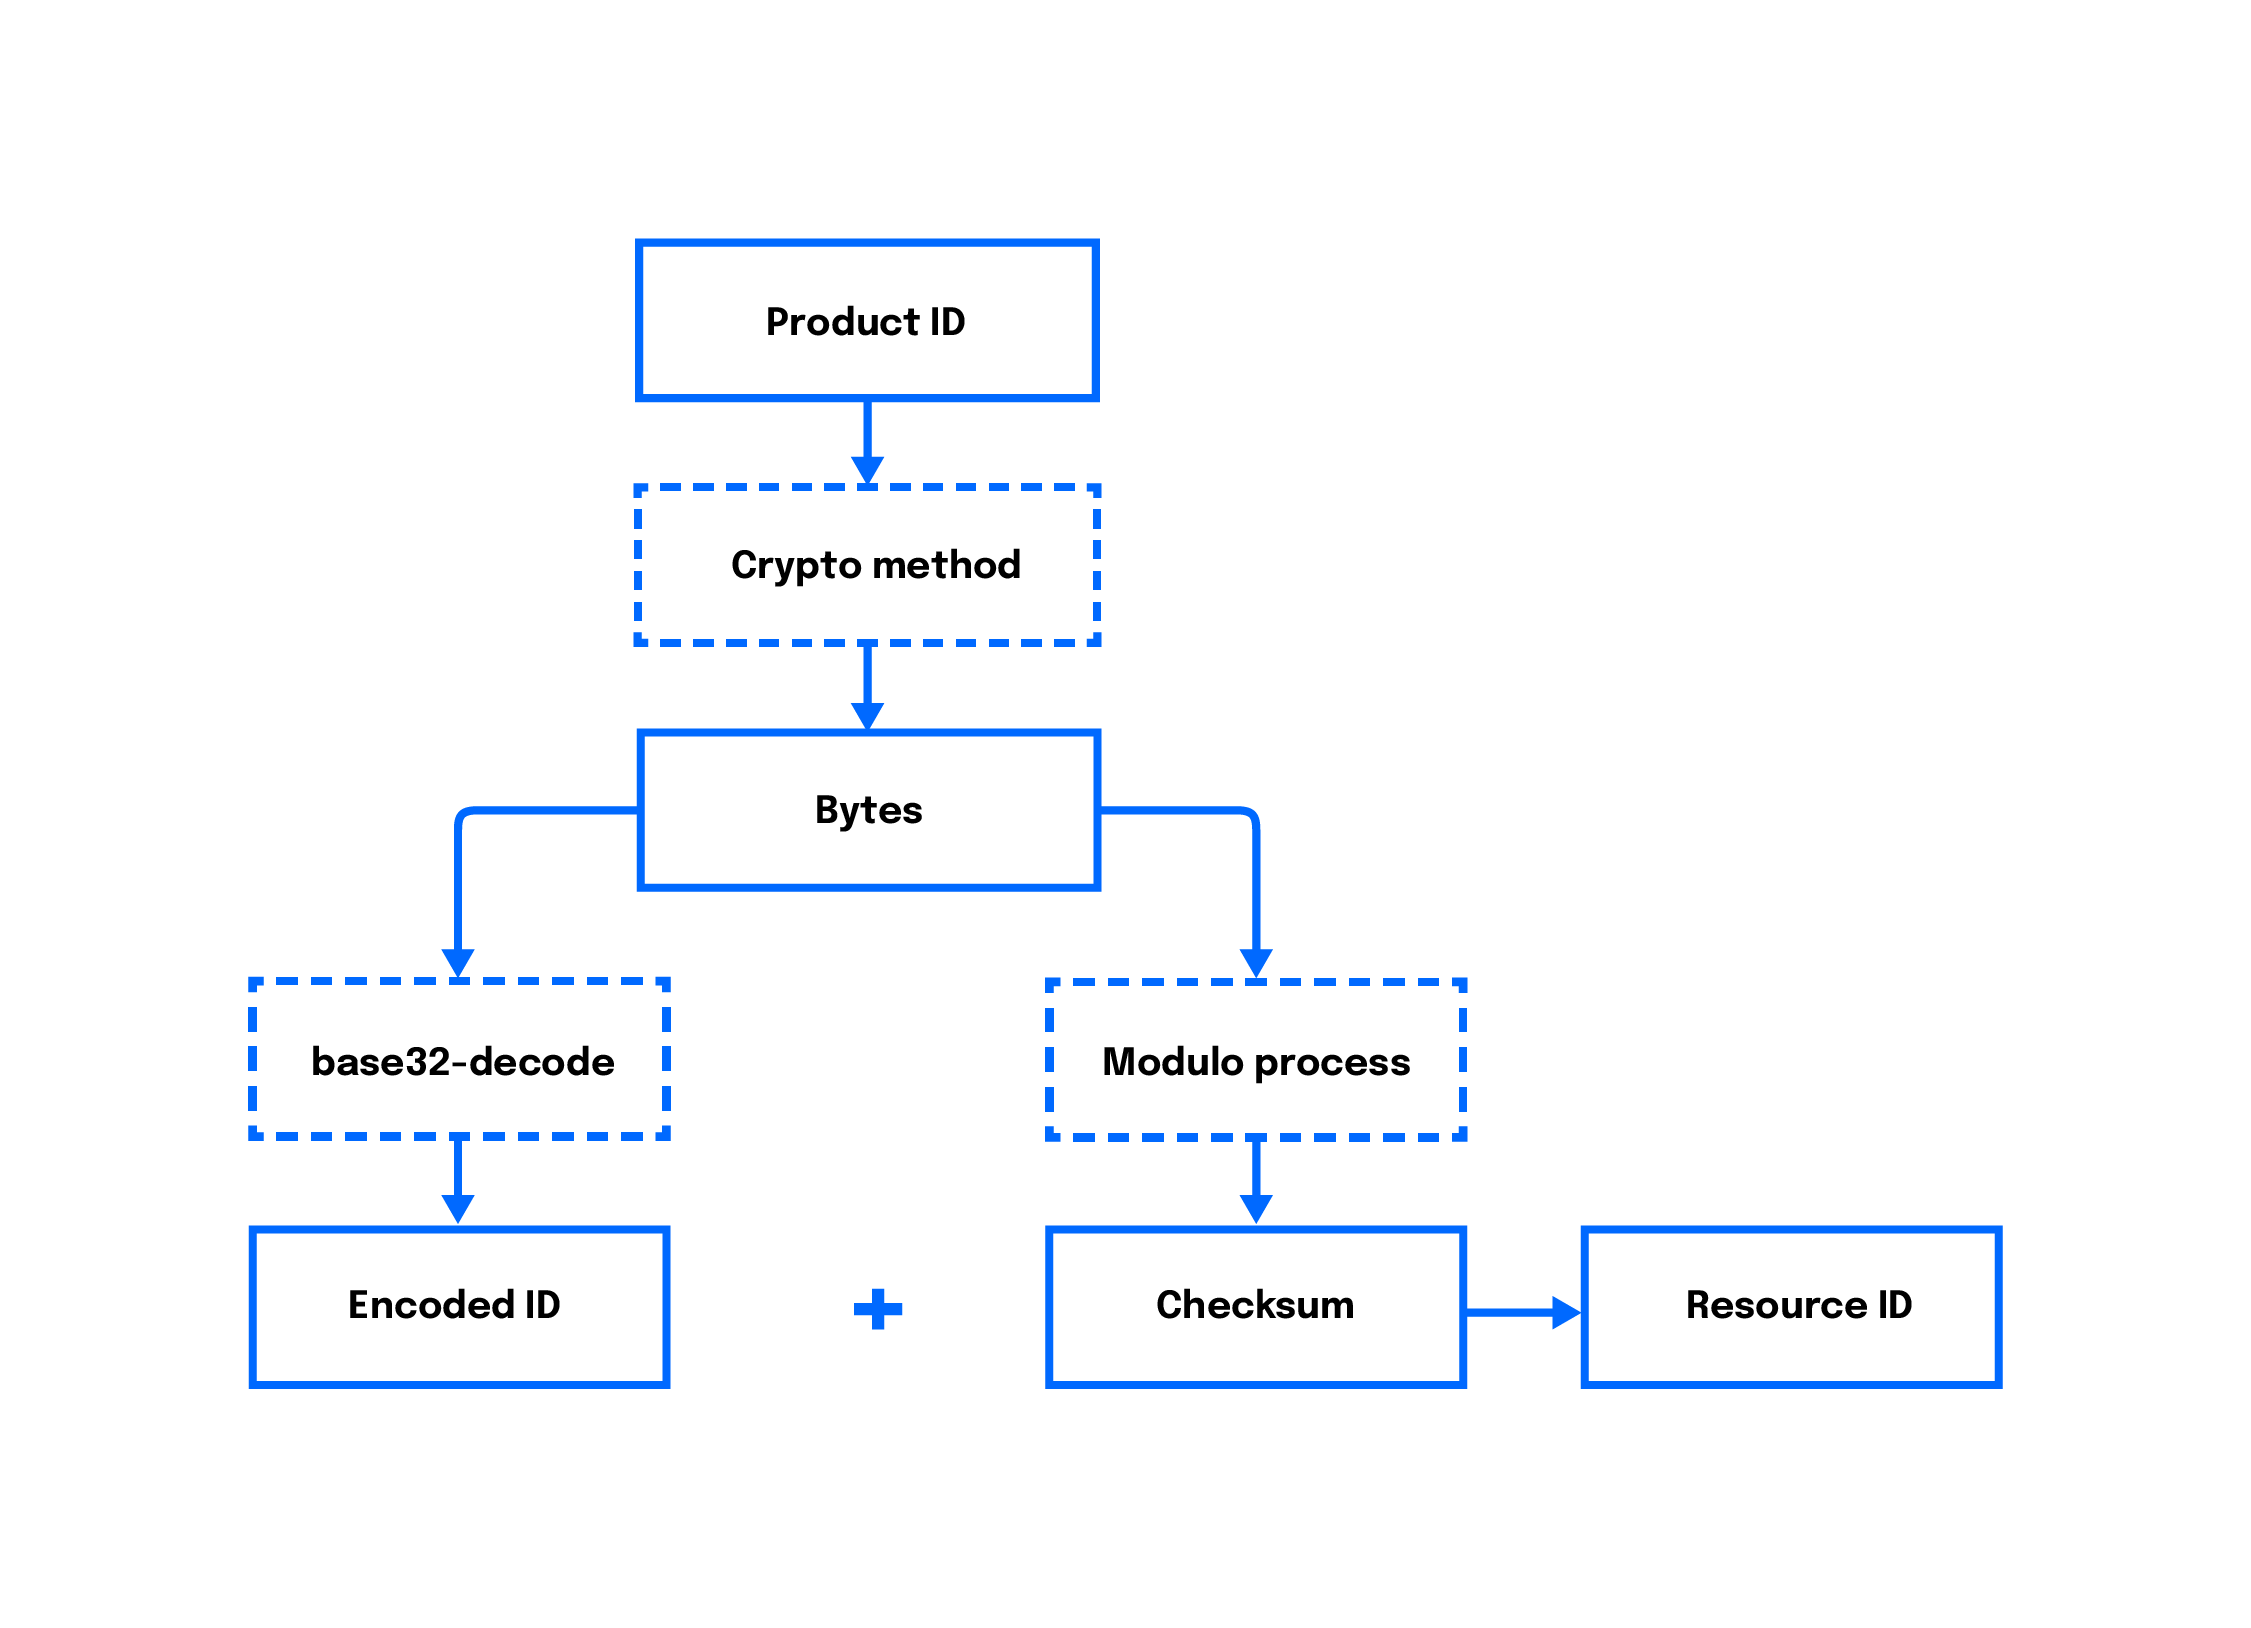 A chart with Product ID at the top. It points to Crypto method, which points to Bytes. There are two branches from Bytes: base32-decode and Modulo process. The base32-decode branch points to the Encoded ID, whereas the Modulo process branch points to the Checksum. When the Encoded ID and Checksum are paired, they become the Resource ID.